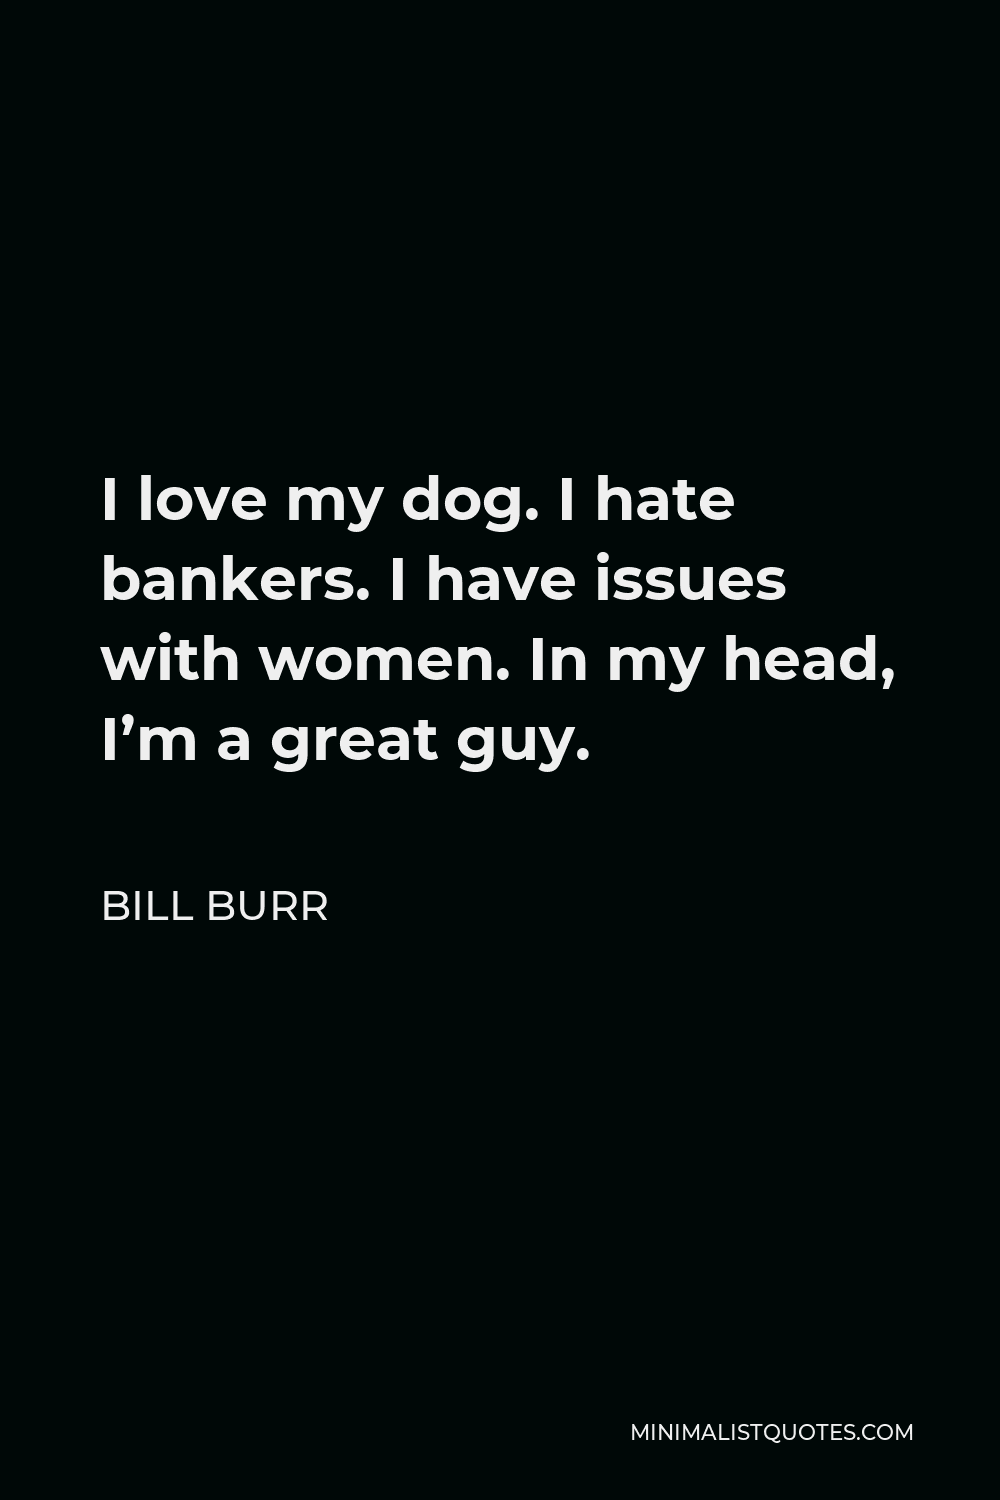 Bill Burr Quote - I love my dog. I hate bankers. I have issues with women. In my head, I’m a great guy.